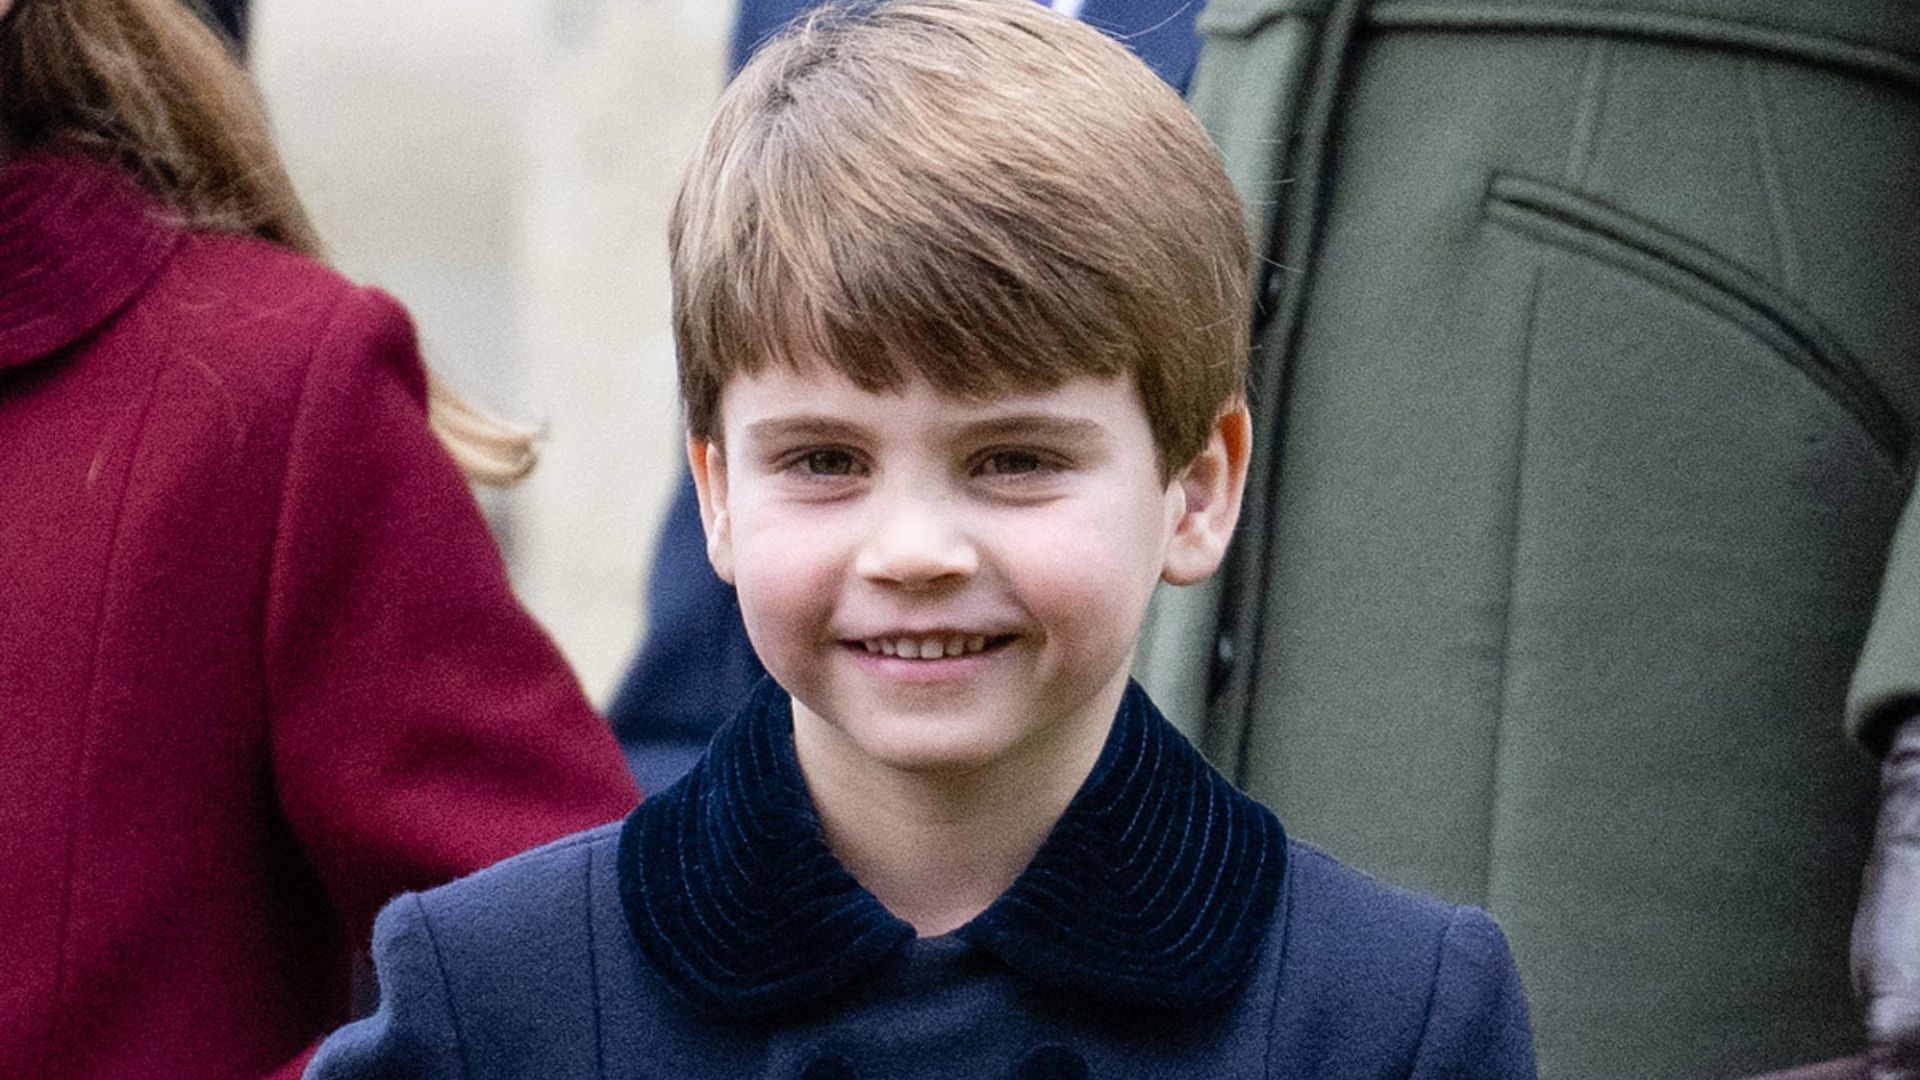 Cheeky Prince Louis shows off his outfit in adorable moment during Christmas walkabout